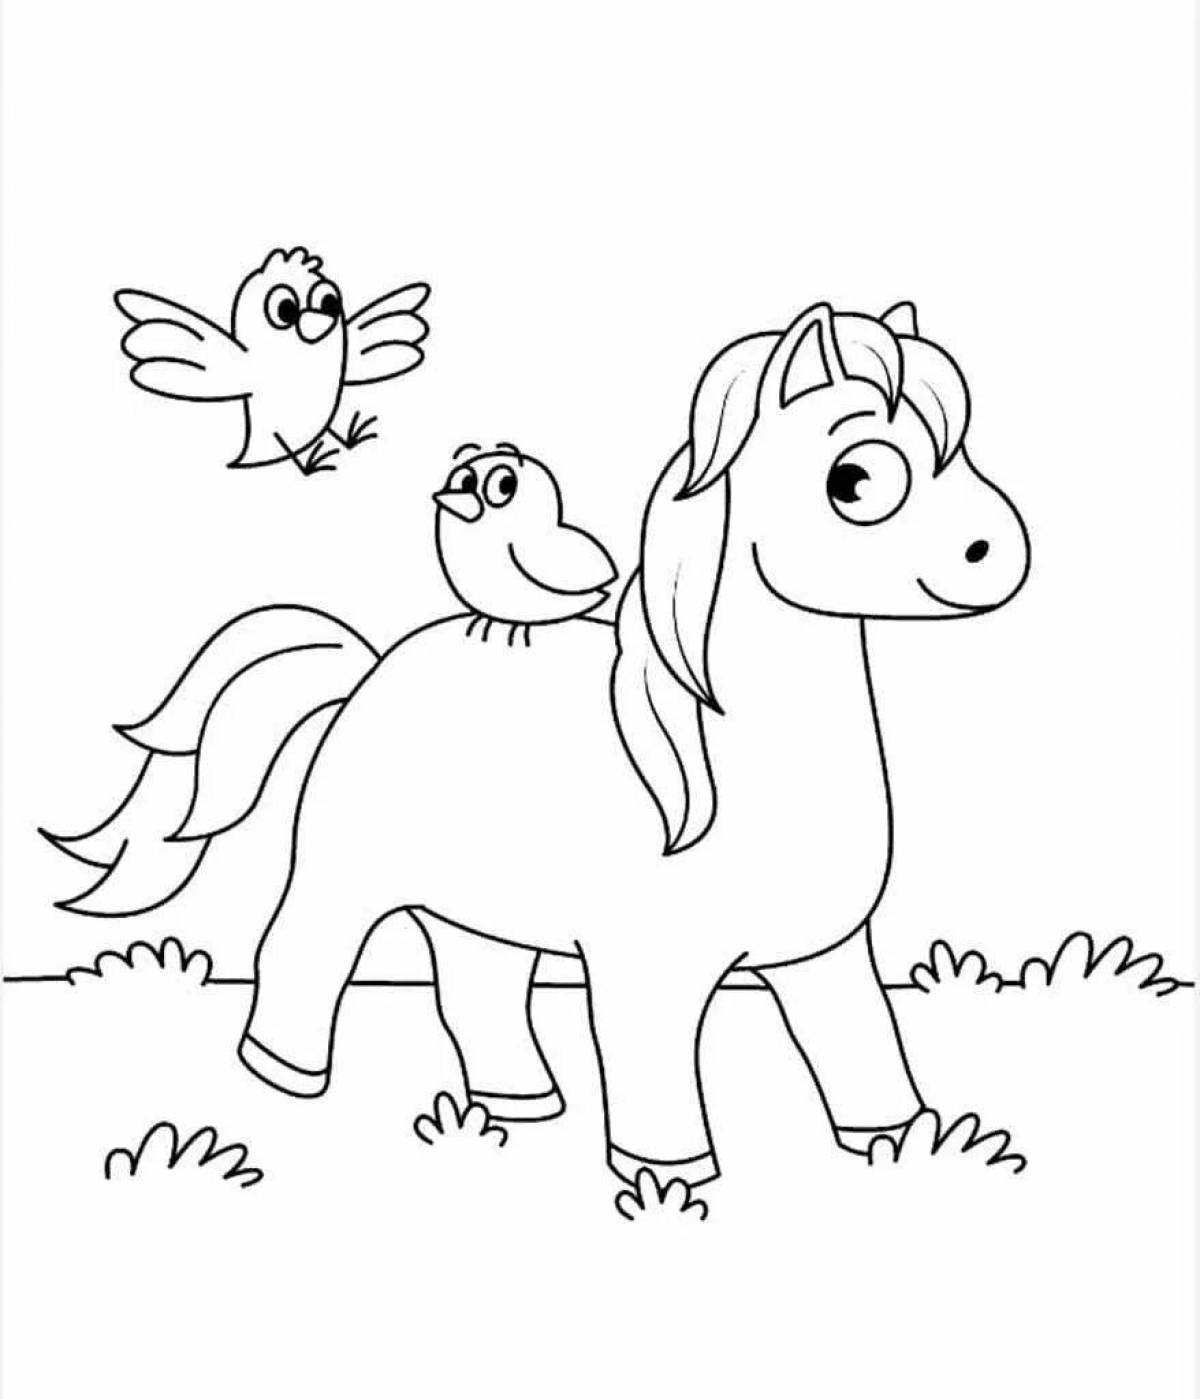 Color-fiesta horse coloring page for children 2-3 years old